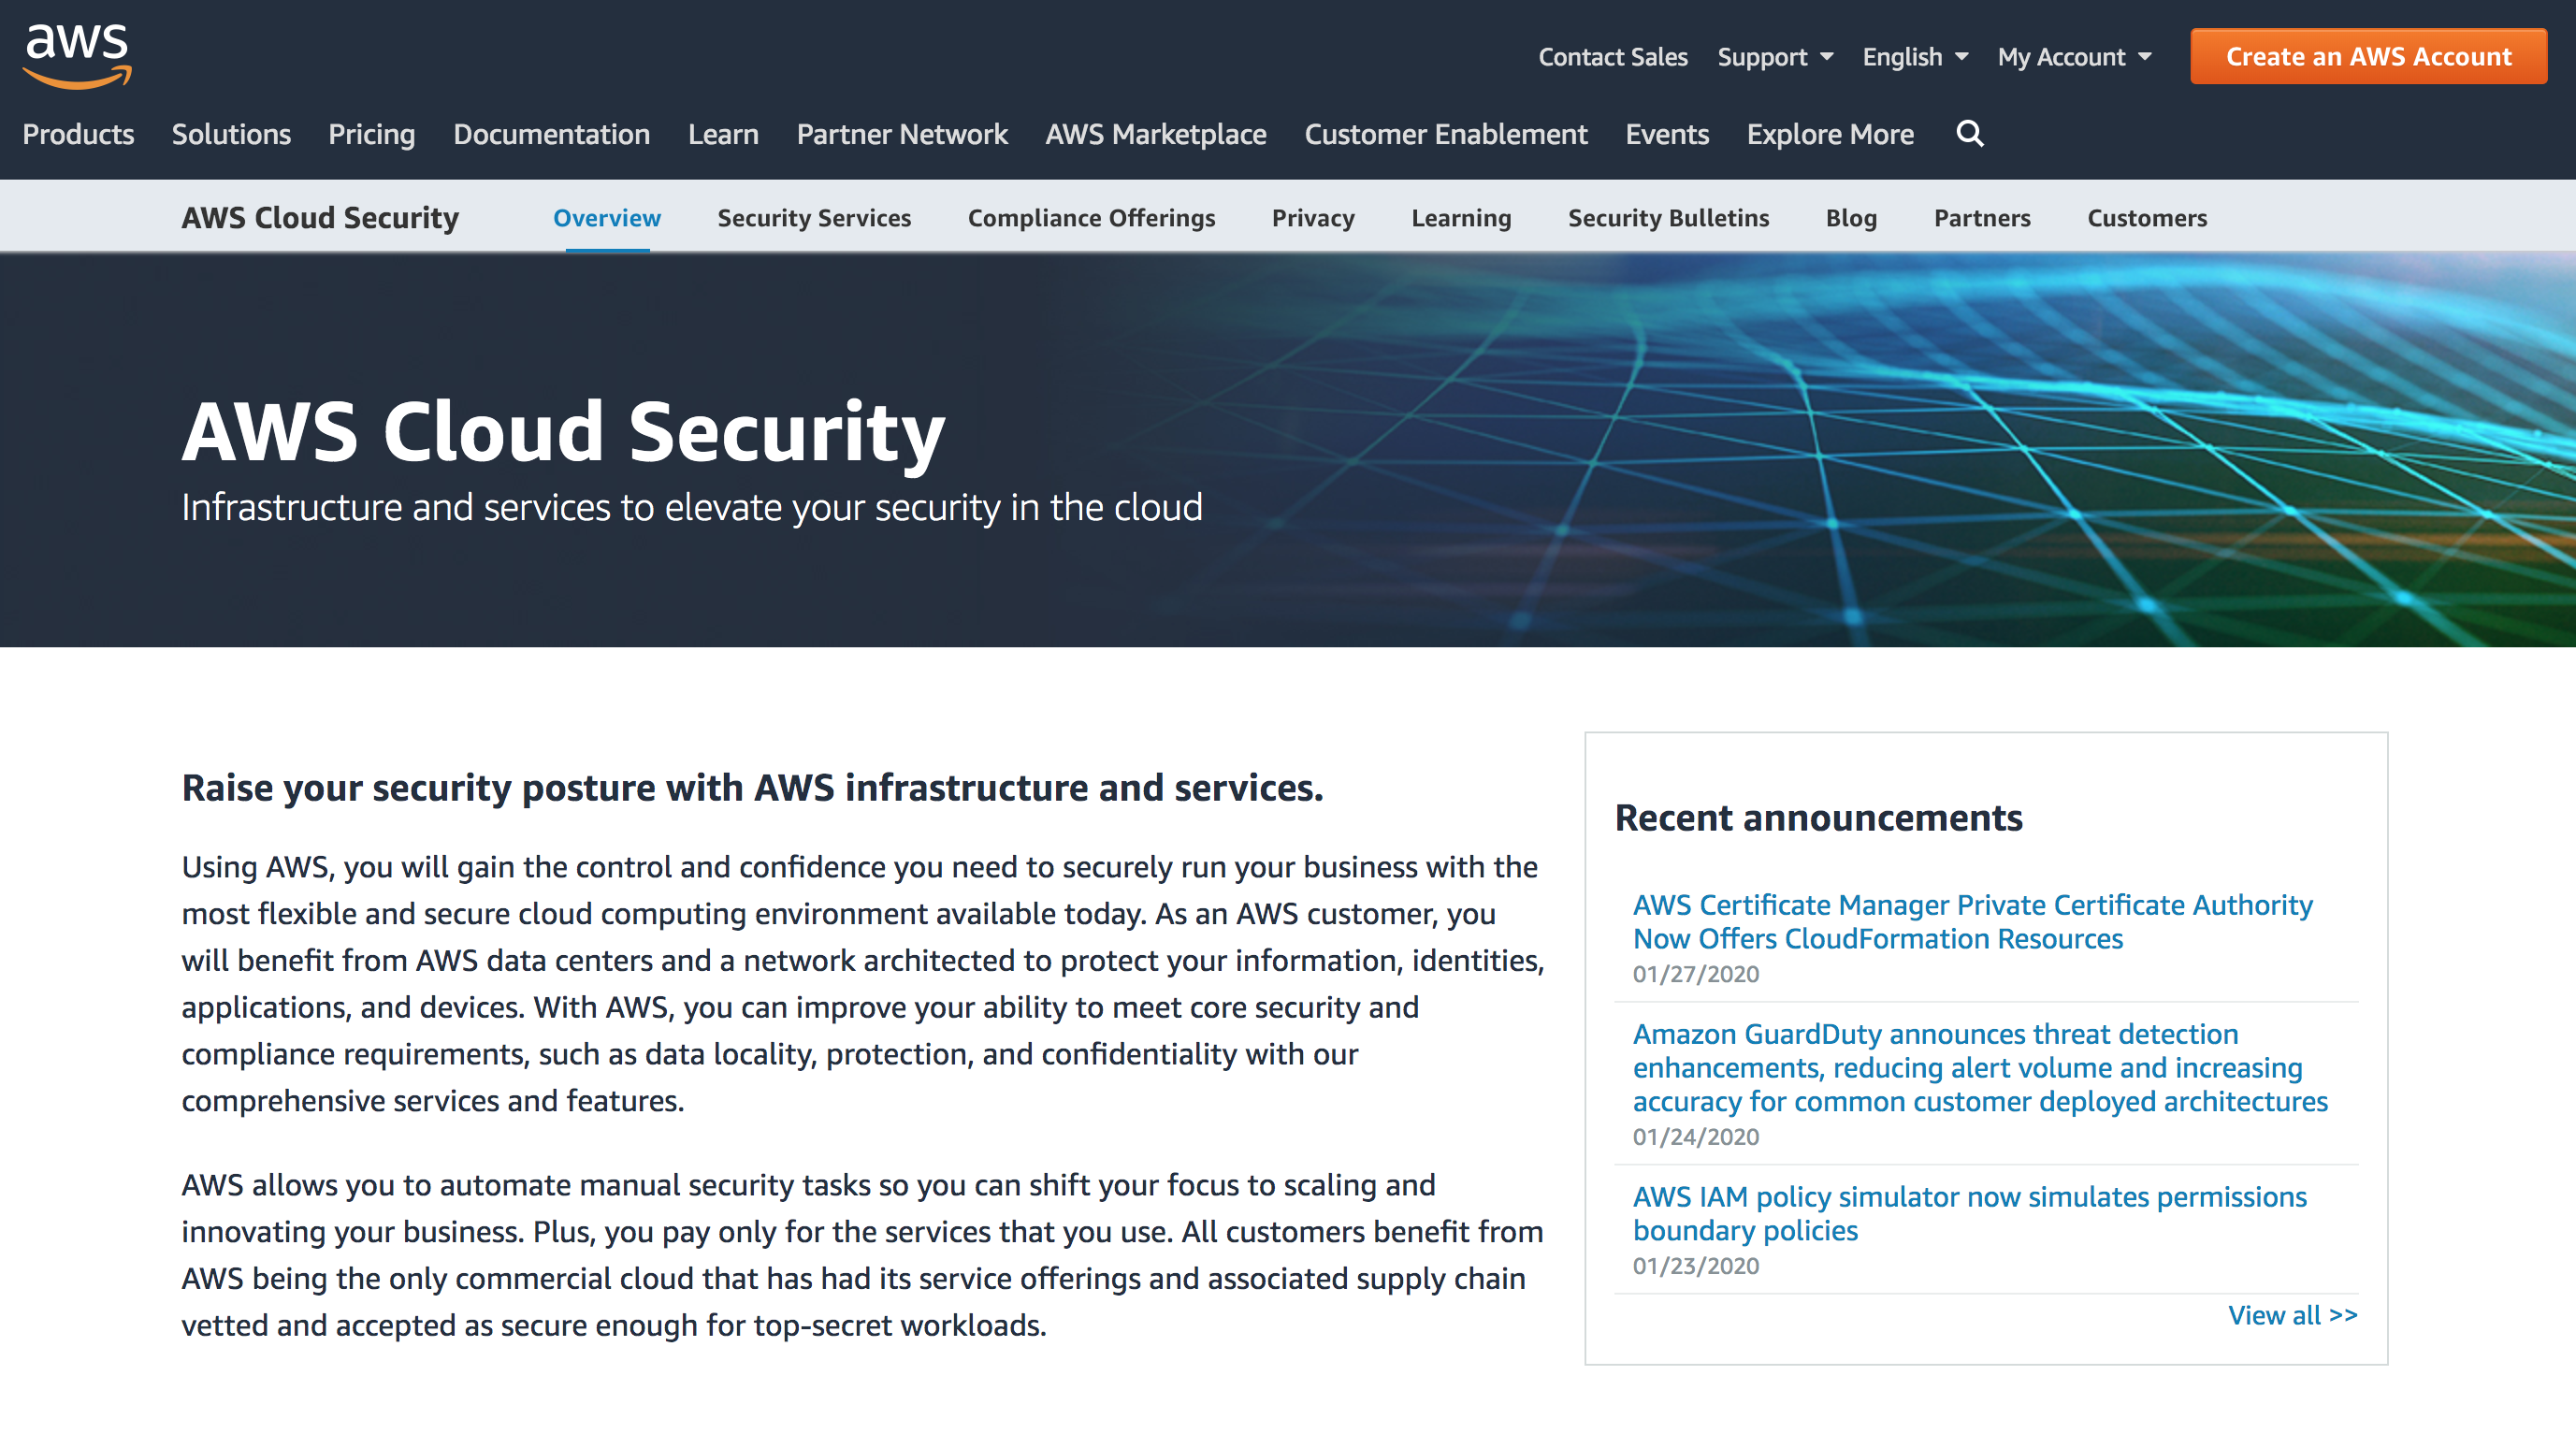 A redirect to Amazon’s cloud security portal